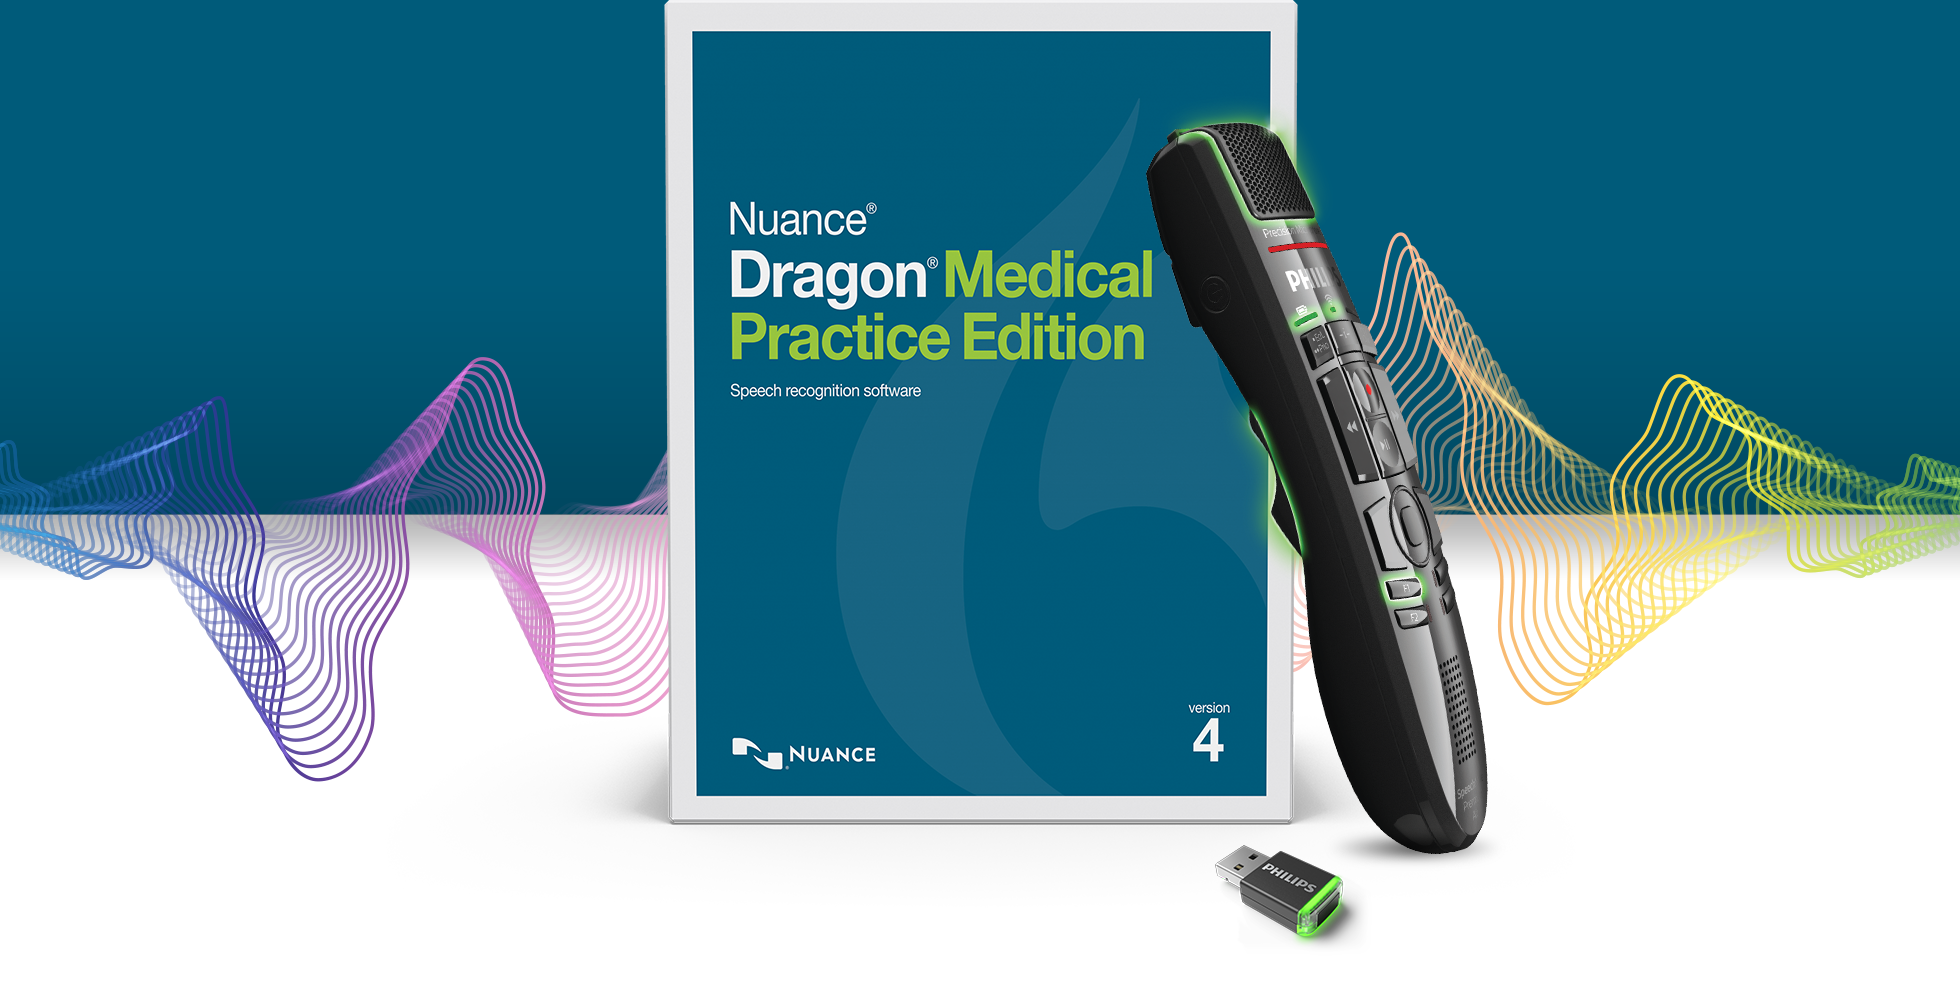 Nuance Dragon Medical Practice Edition with Philips SpeechMike Premium Air and Philips AirBridge